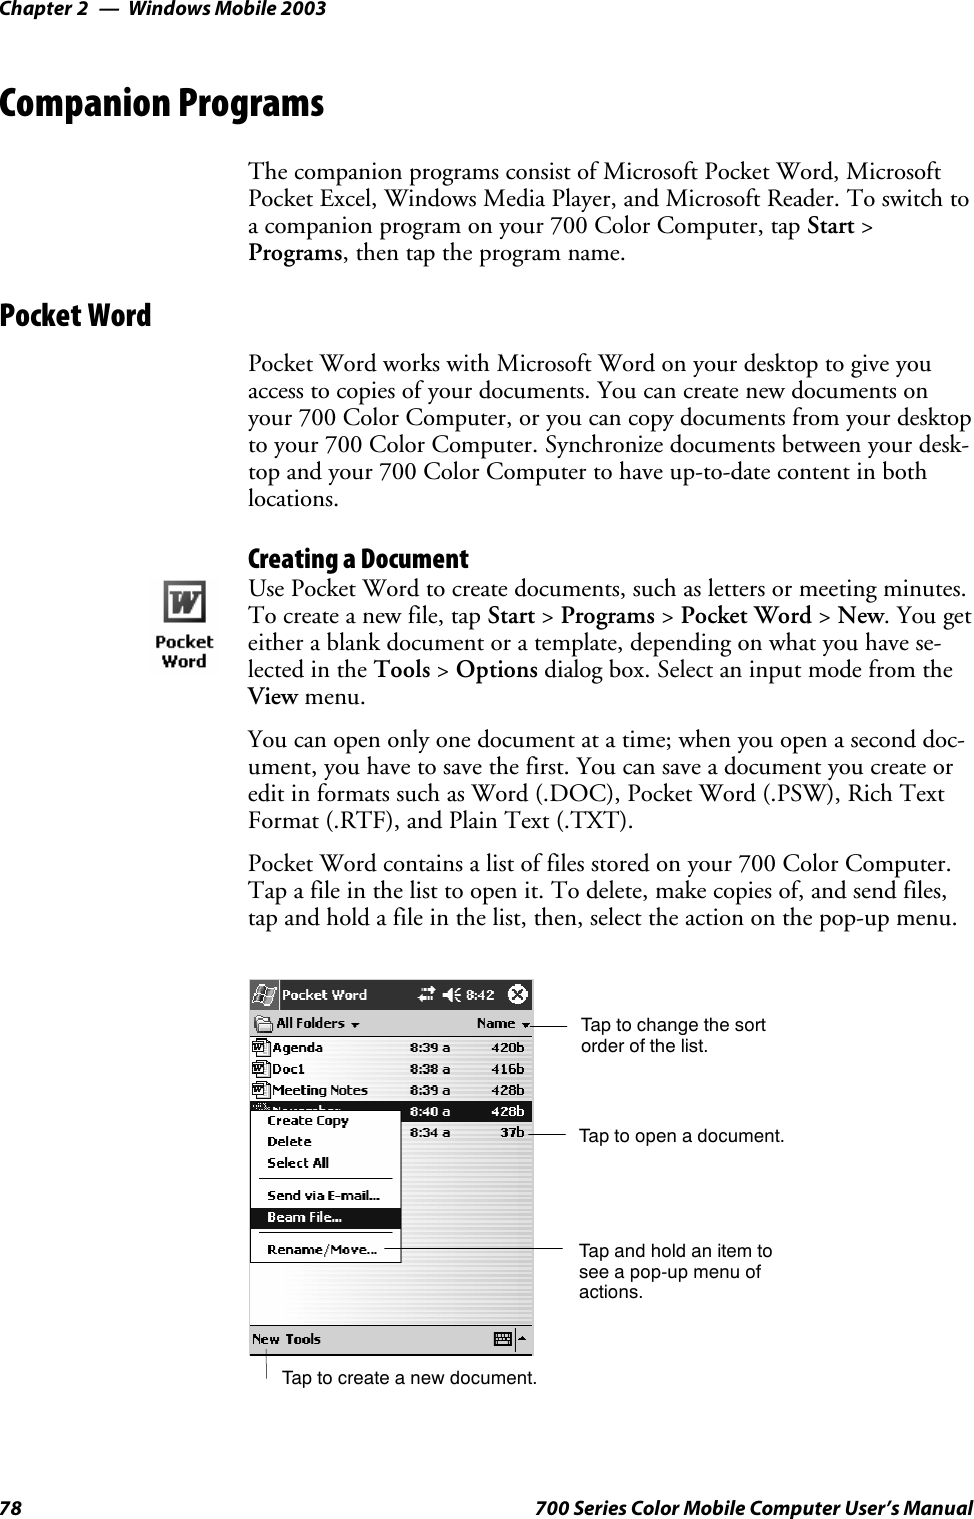 Windows Mobile 2003Chapter —278 700 Series Color Mobile Computer User’s ManualCompanion ProgramsThe companion programs consist of Microsoft Pocket Word, MicrosoftPocket Excel, Windows Media Player, and Microsoft Reader. To switch toa companion program on your 700 Color Computer, tap Start &gt;Programs, then tap the program name.Pocket WordPocket Word works with Microsoft Word on your desktop to give youaccess to copies of your documents. You can create new documents onyour 700 Color Computer, or you can copy documents from your desktopto your 700 Color Computer. Synchronize documents between your desk-top and your 700 Color Computer to have up-to-date content in bothlocations.Creating a DocumentUse Pocket Word to create documents, such as letters or meeting minutes.To create a new file, tap Start &gt;Programs &gt;Pocket Word &gt;New.Yougeteither a blank document or a template, depending on what you have se-lected in the Tools &gt;Options dialog box. Select an input mode from theView menu.You can open only one document at a time; when you open a second doc-ument, you have to save the first. You can save a document you create oredit in formats such as Word (.DOC), Pocket Word (.PSW), Rich TextFormat (.RTF), and Plain Text (.TXT).Pocket Word contains a list of files stored on your 700 Color Computer.Tap a file in the list to open it. To delete, make copies of, and send files,tap and hold a file in the list, then, select the action on the pop-up menu.Tap to change the sortorder of the list.Tap to create a new document.Tap to open a document.Tap and hold an item tosee a pop-up menu ofactions.